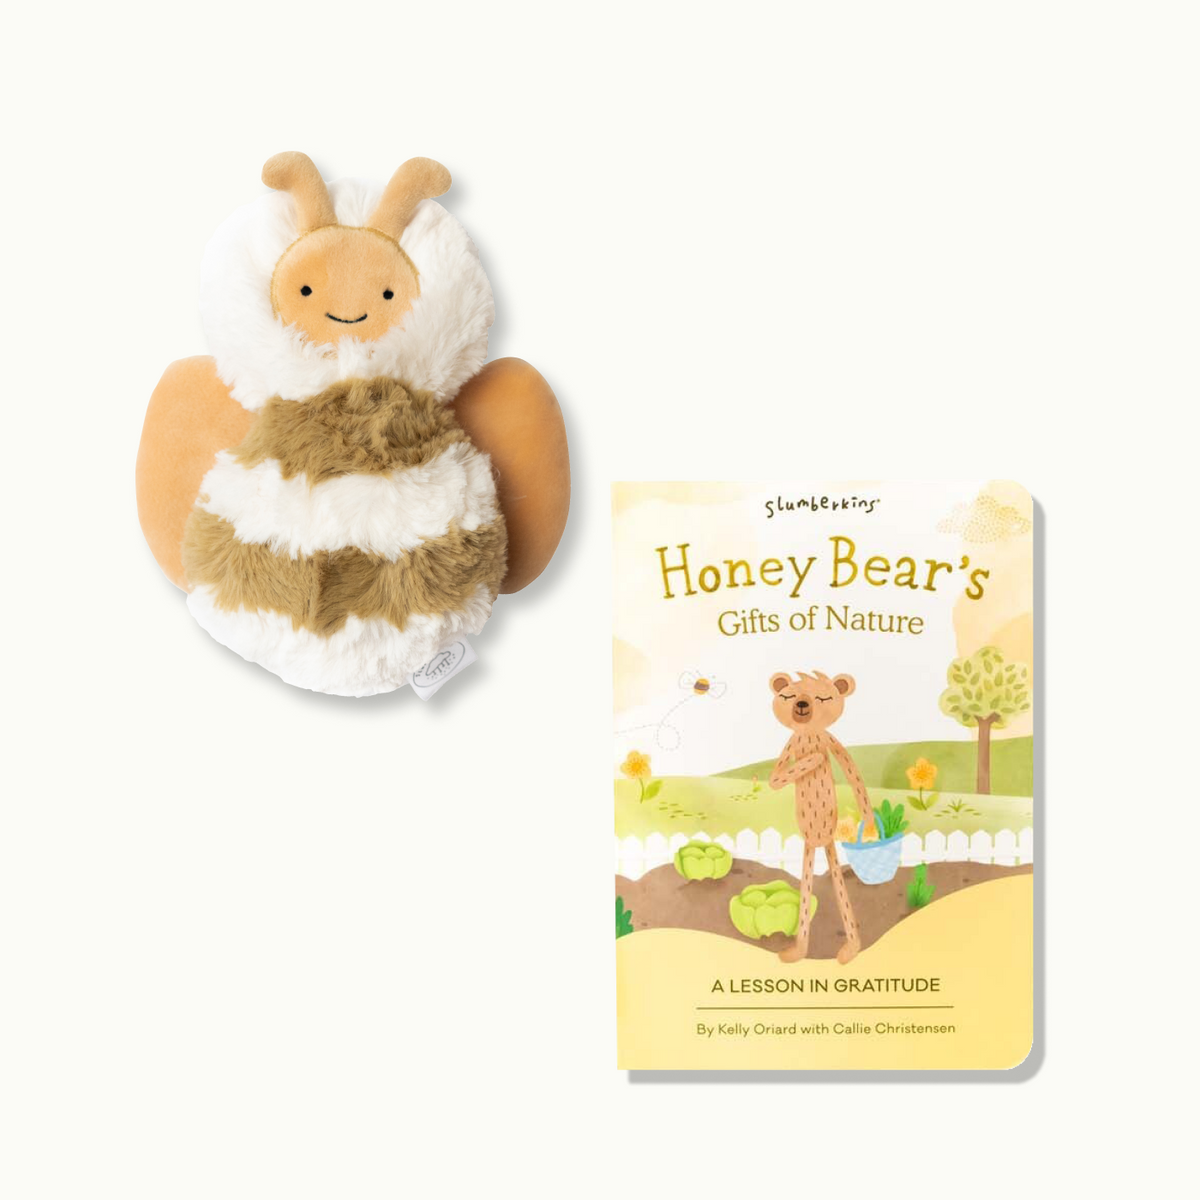 Honey Bee Mini and Slumberkins "Honey Bear's Gifts of Nature" Board Book - A lesson in Gratitude by Kelly O. and Callie C.